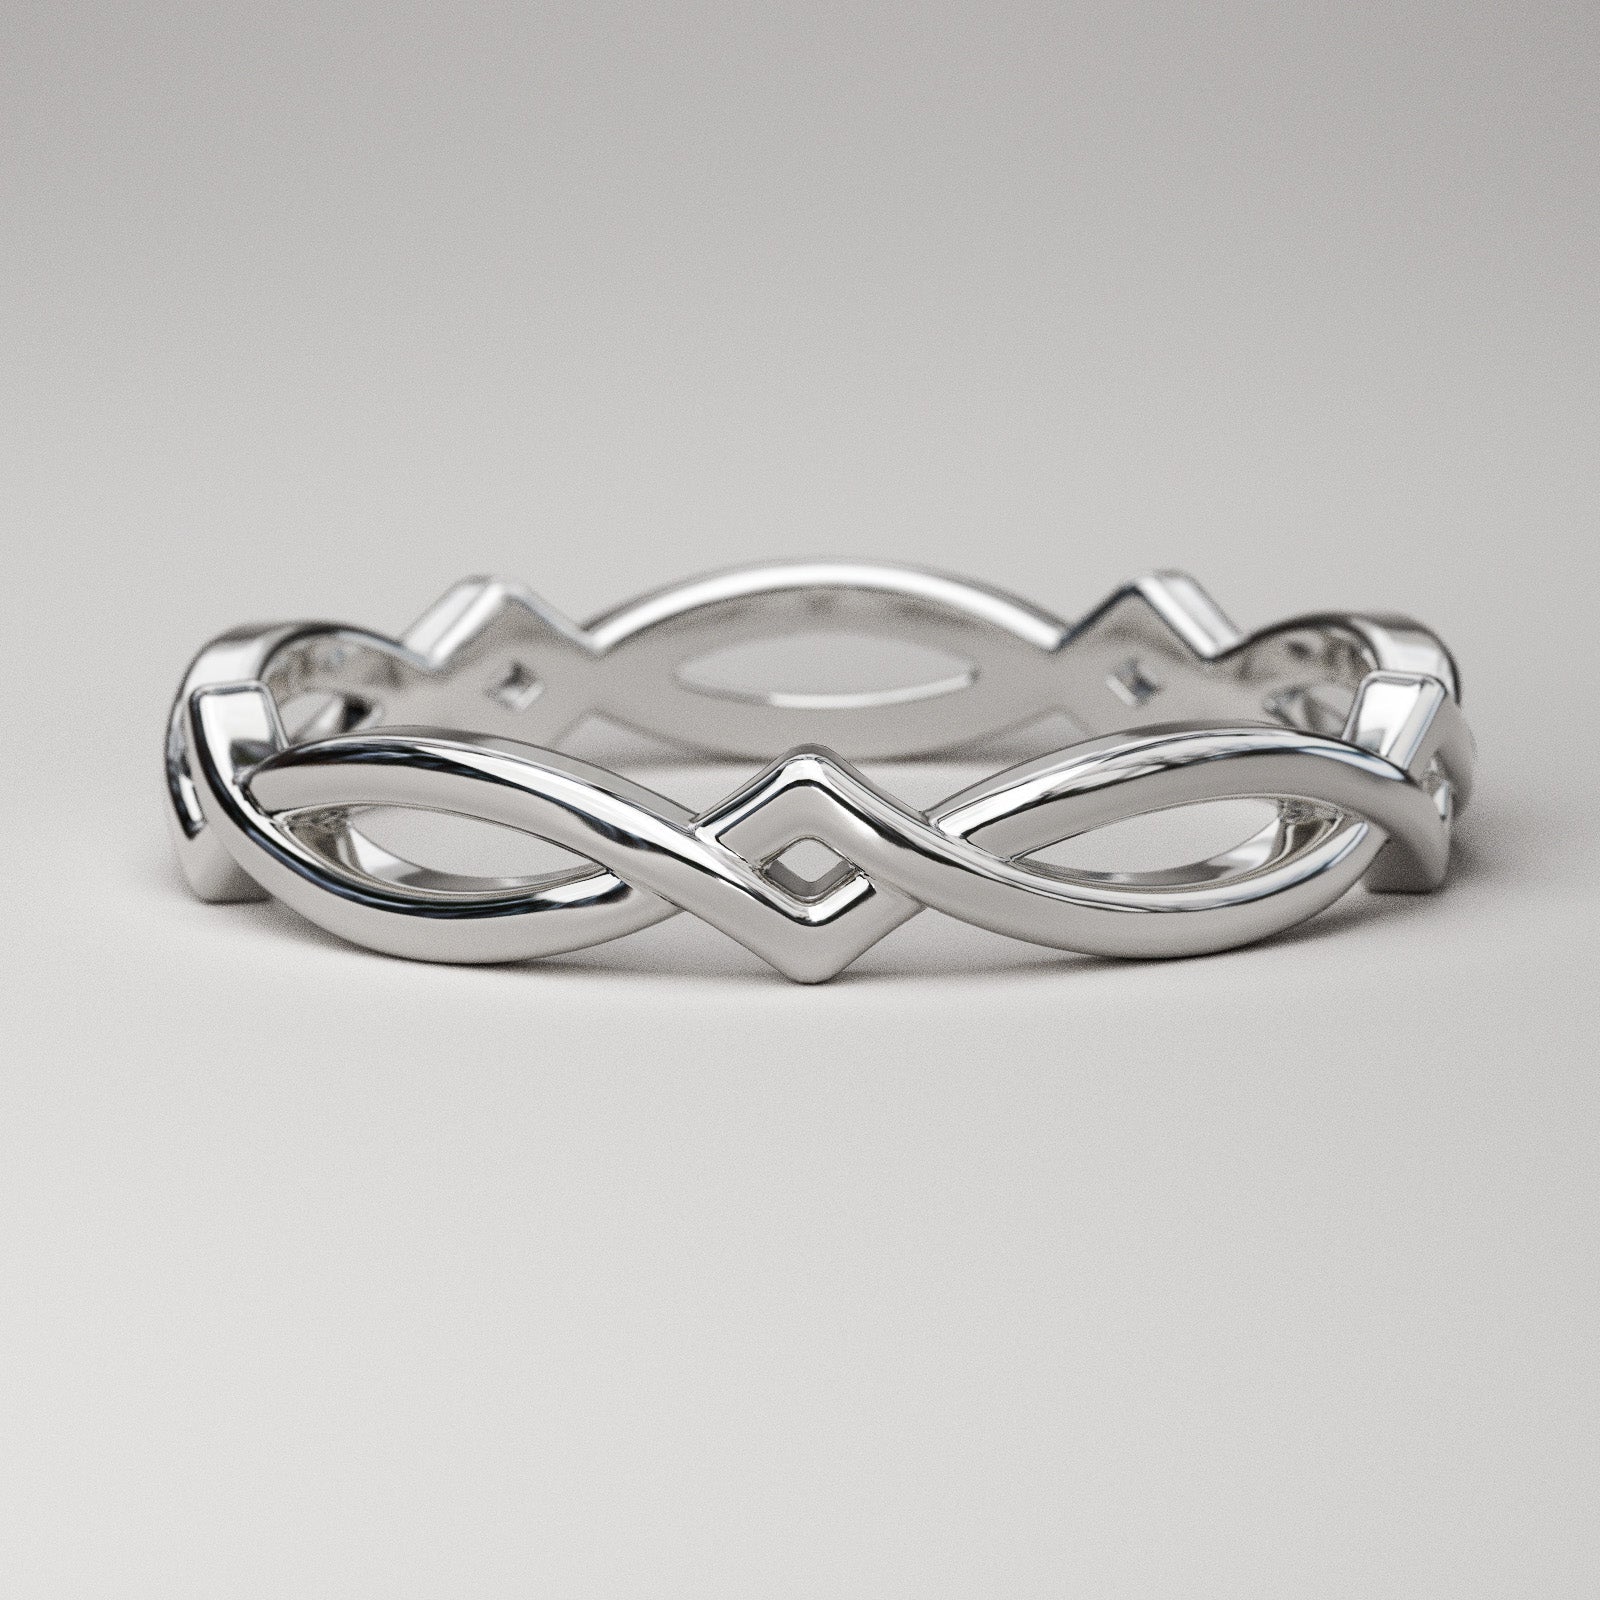 White gold womens wedding band - A simple Celtic design